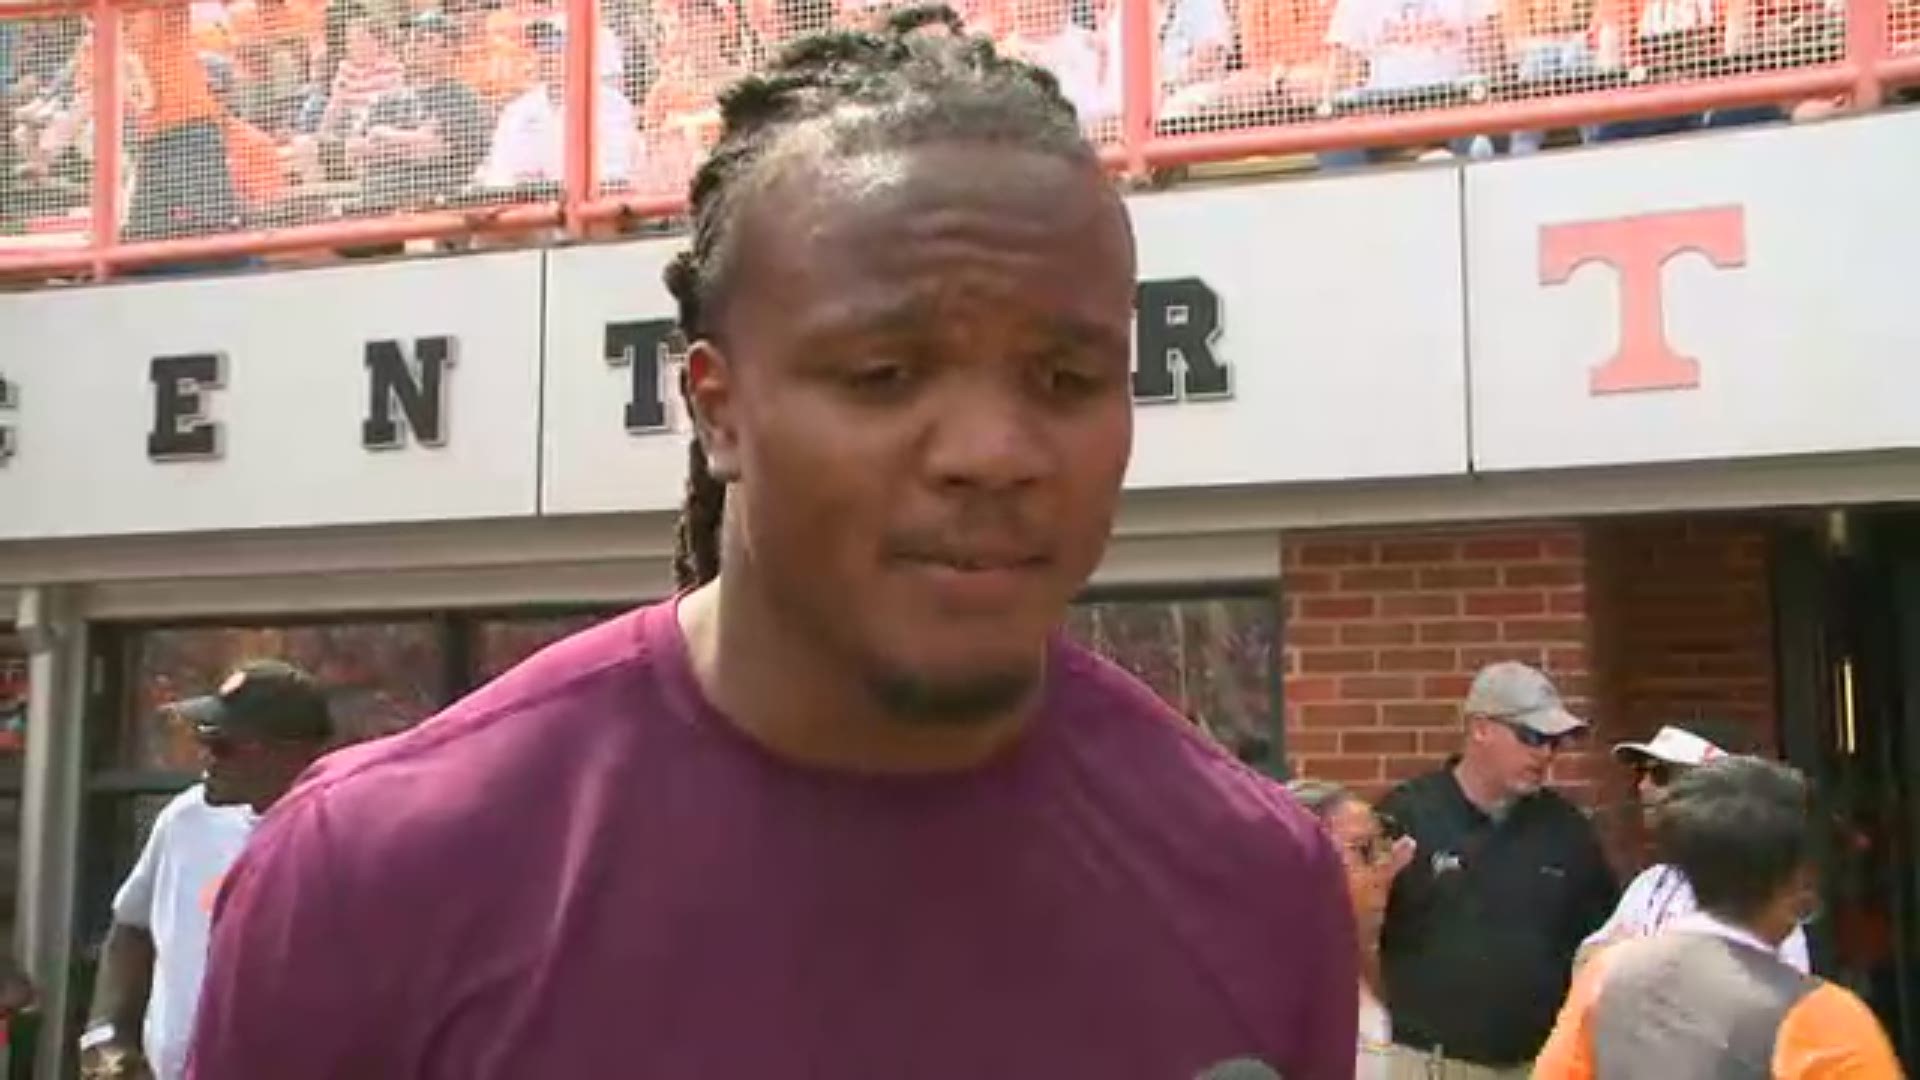 Fan favorite Curt Maggitt talks about photography, and his career as a linebacker.